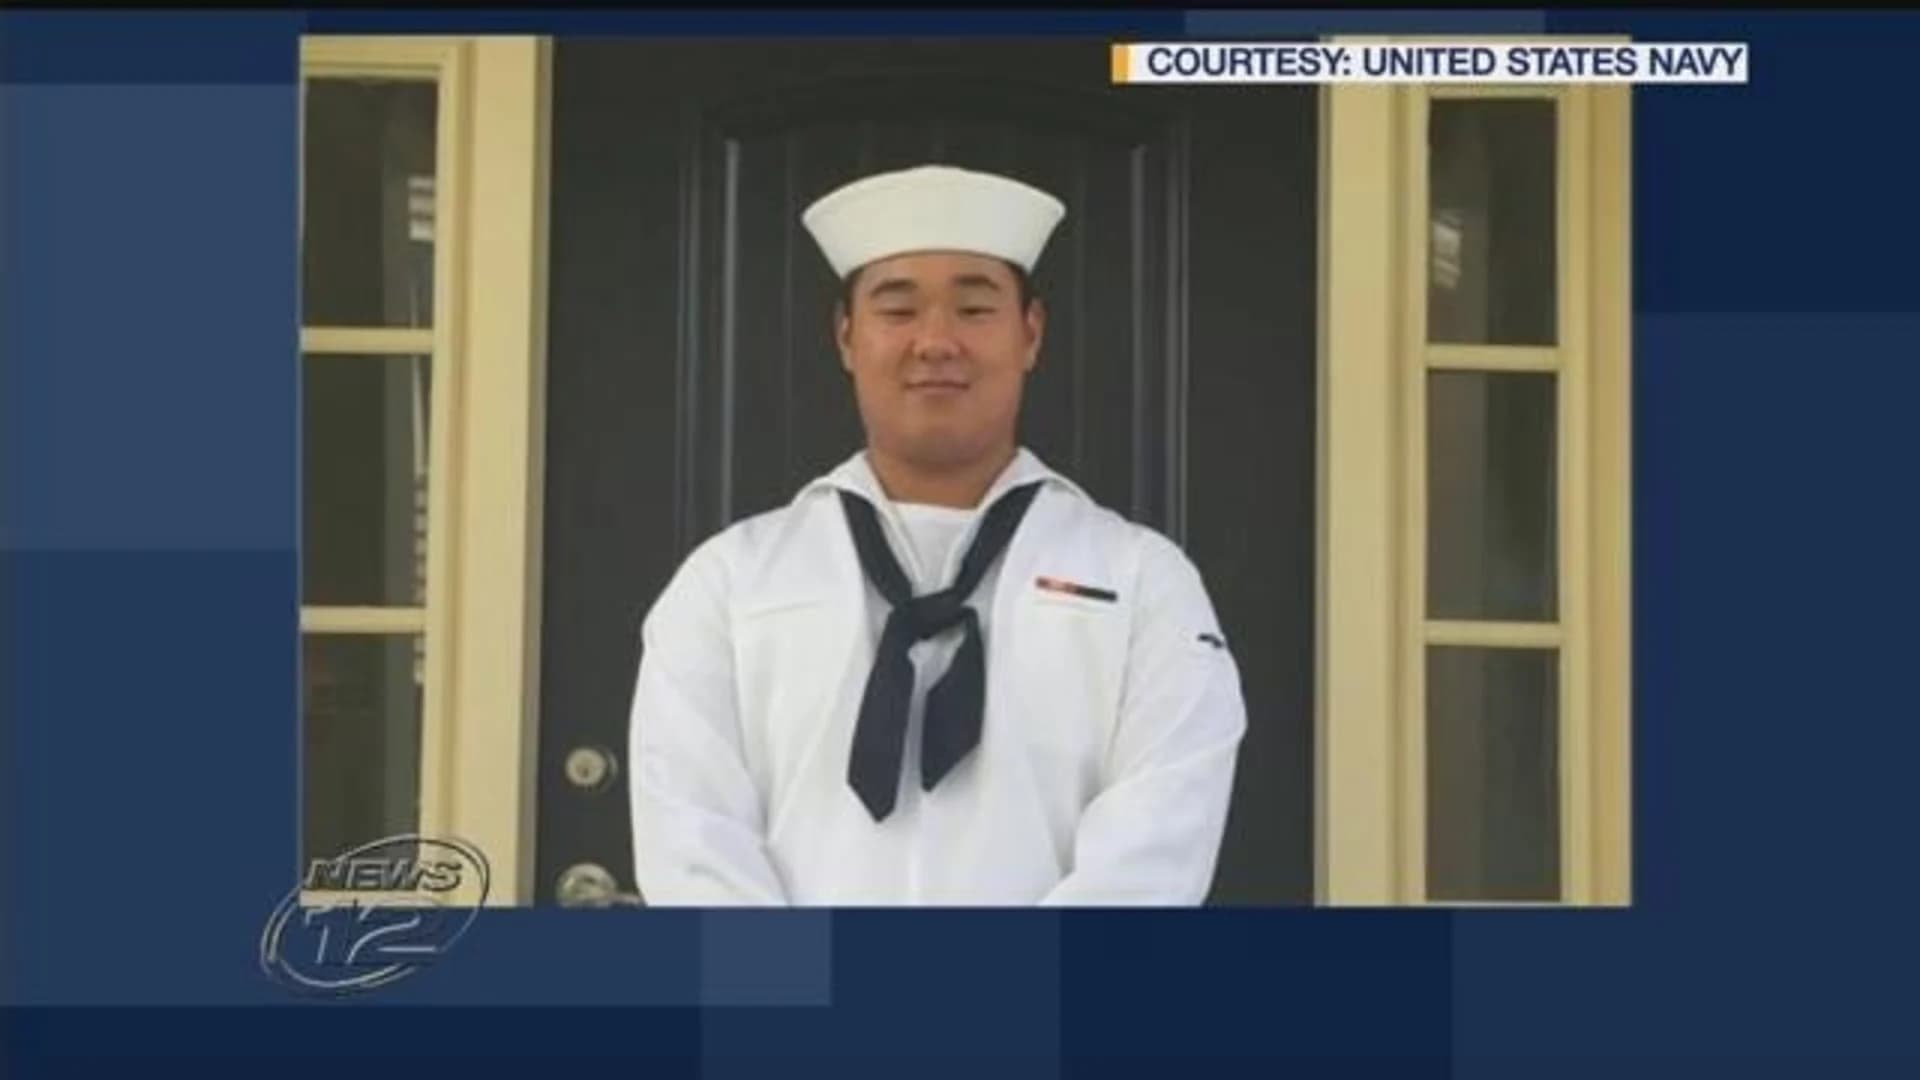 US sailor from NJ stationed in Virginia killed in accident